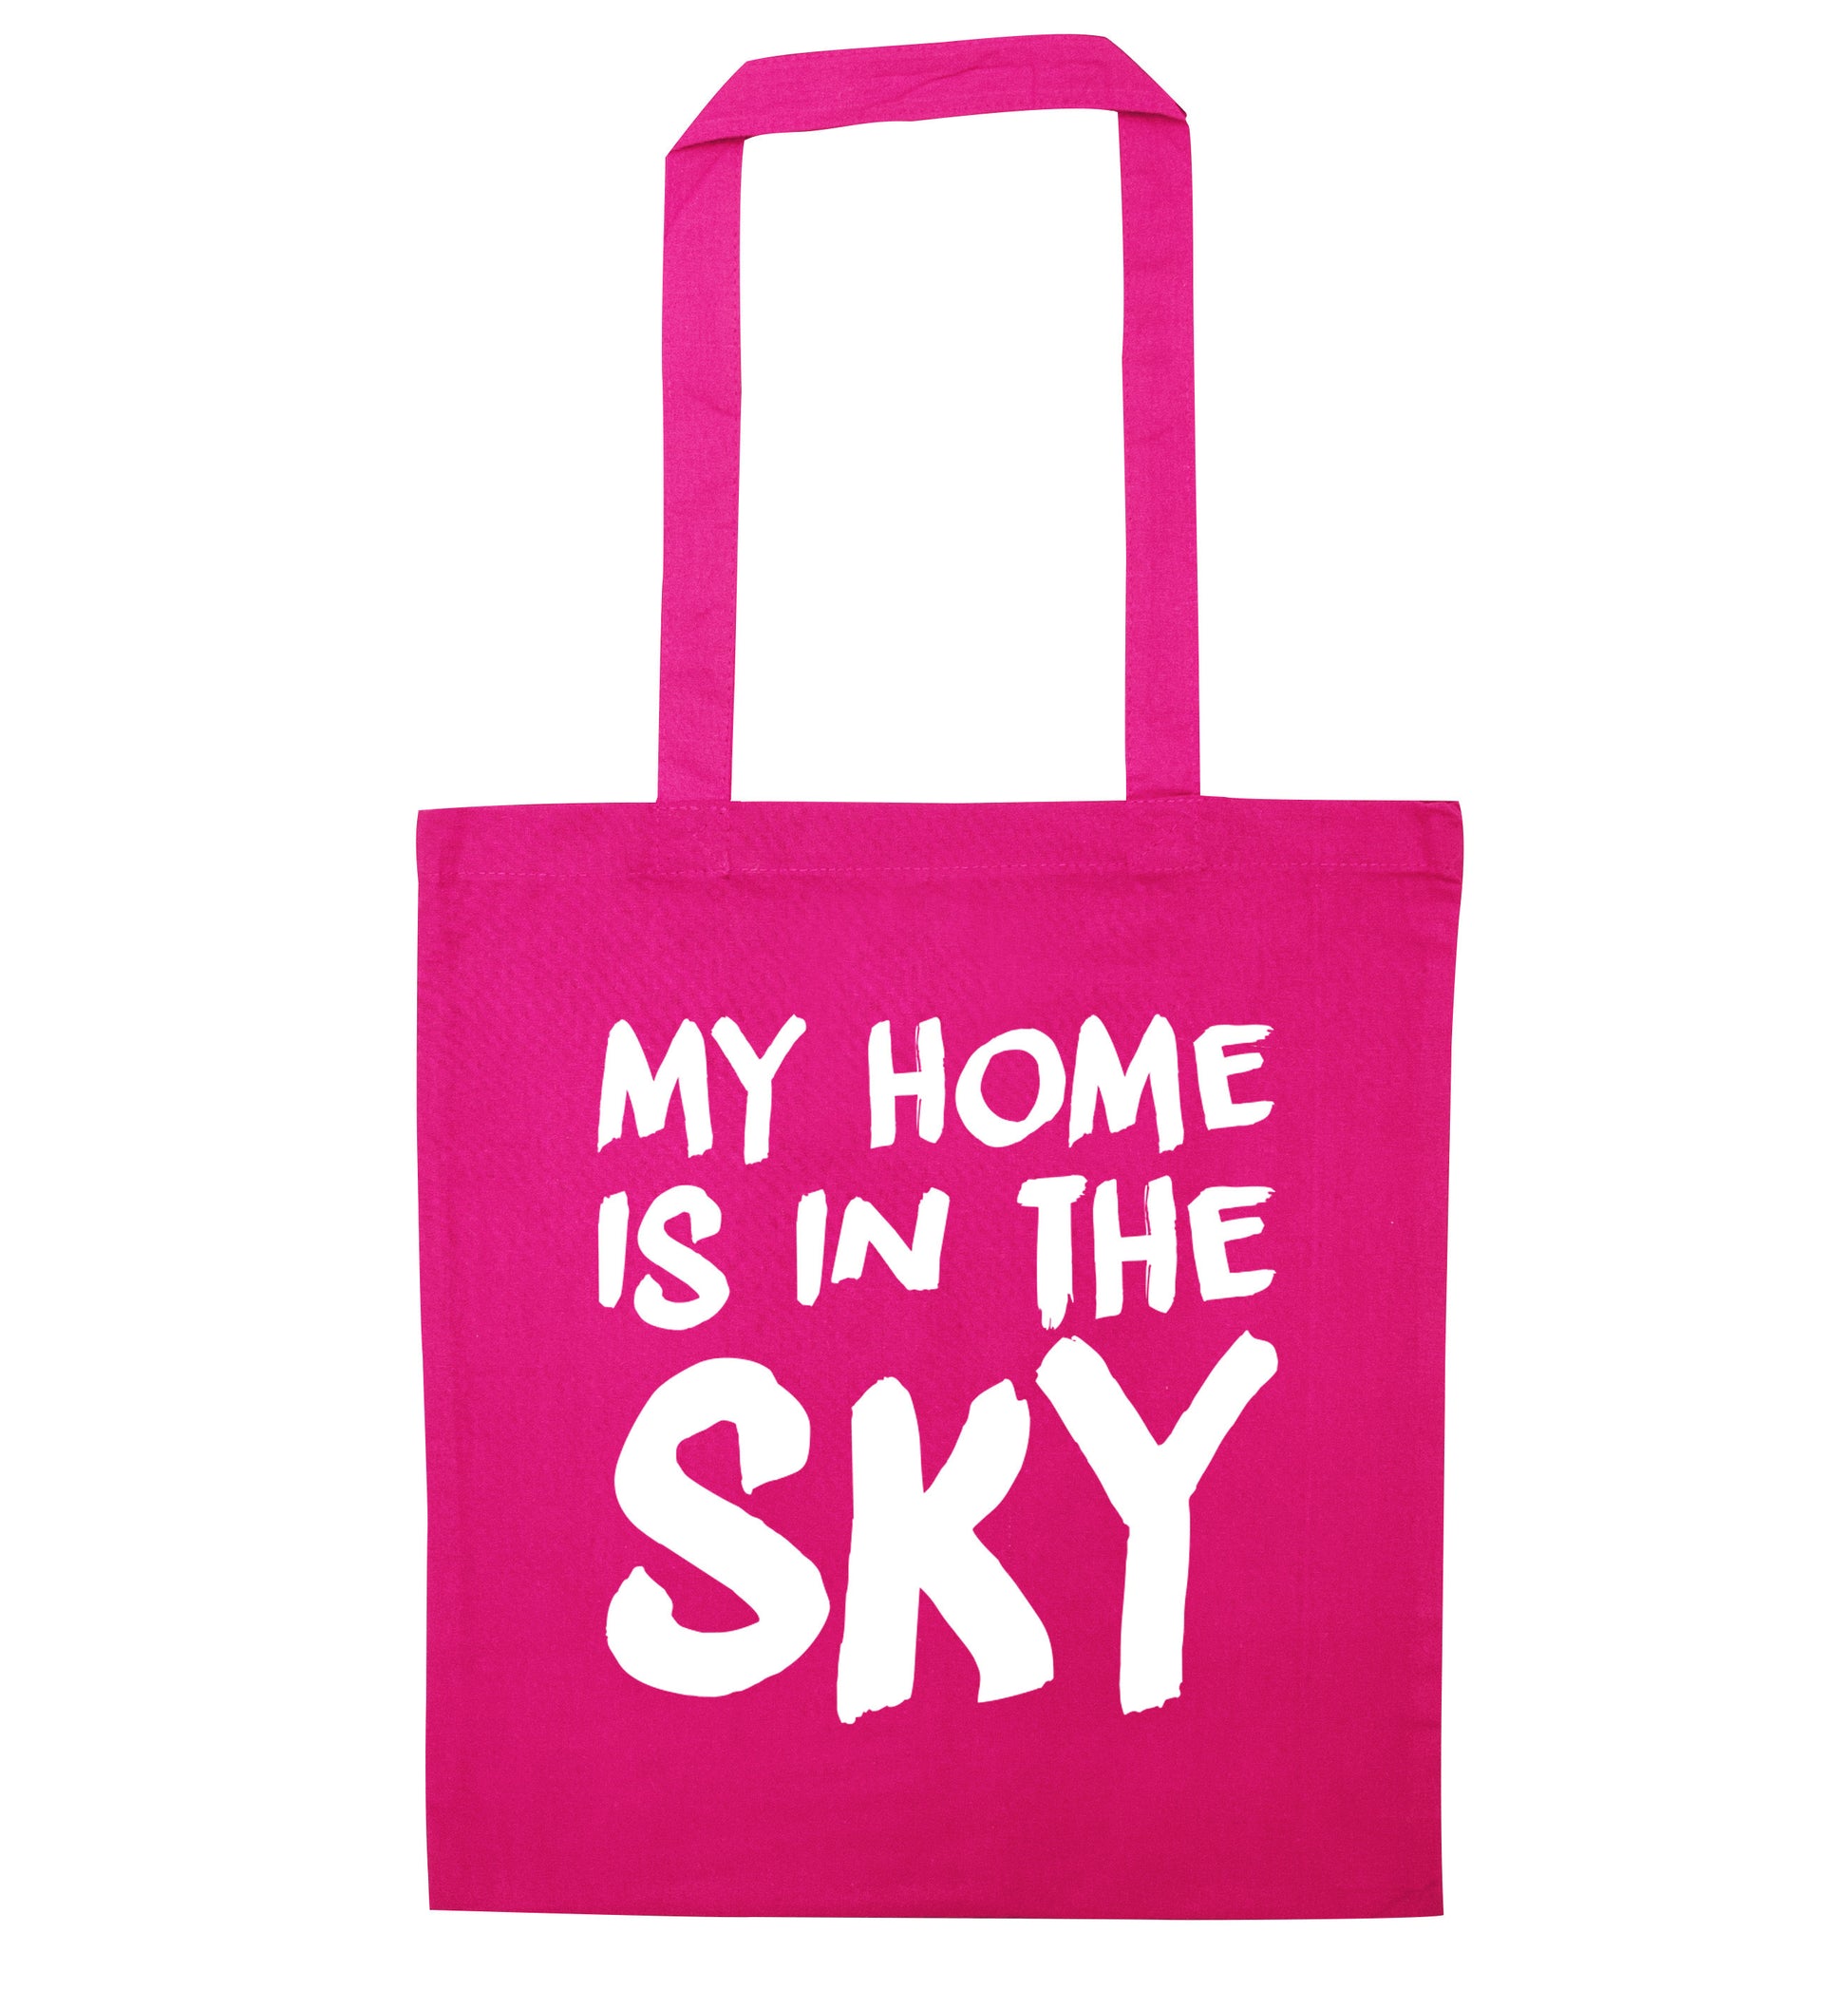 My home is in the sky pink tote bag